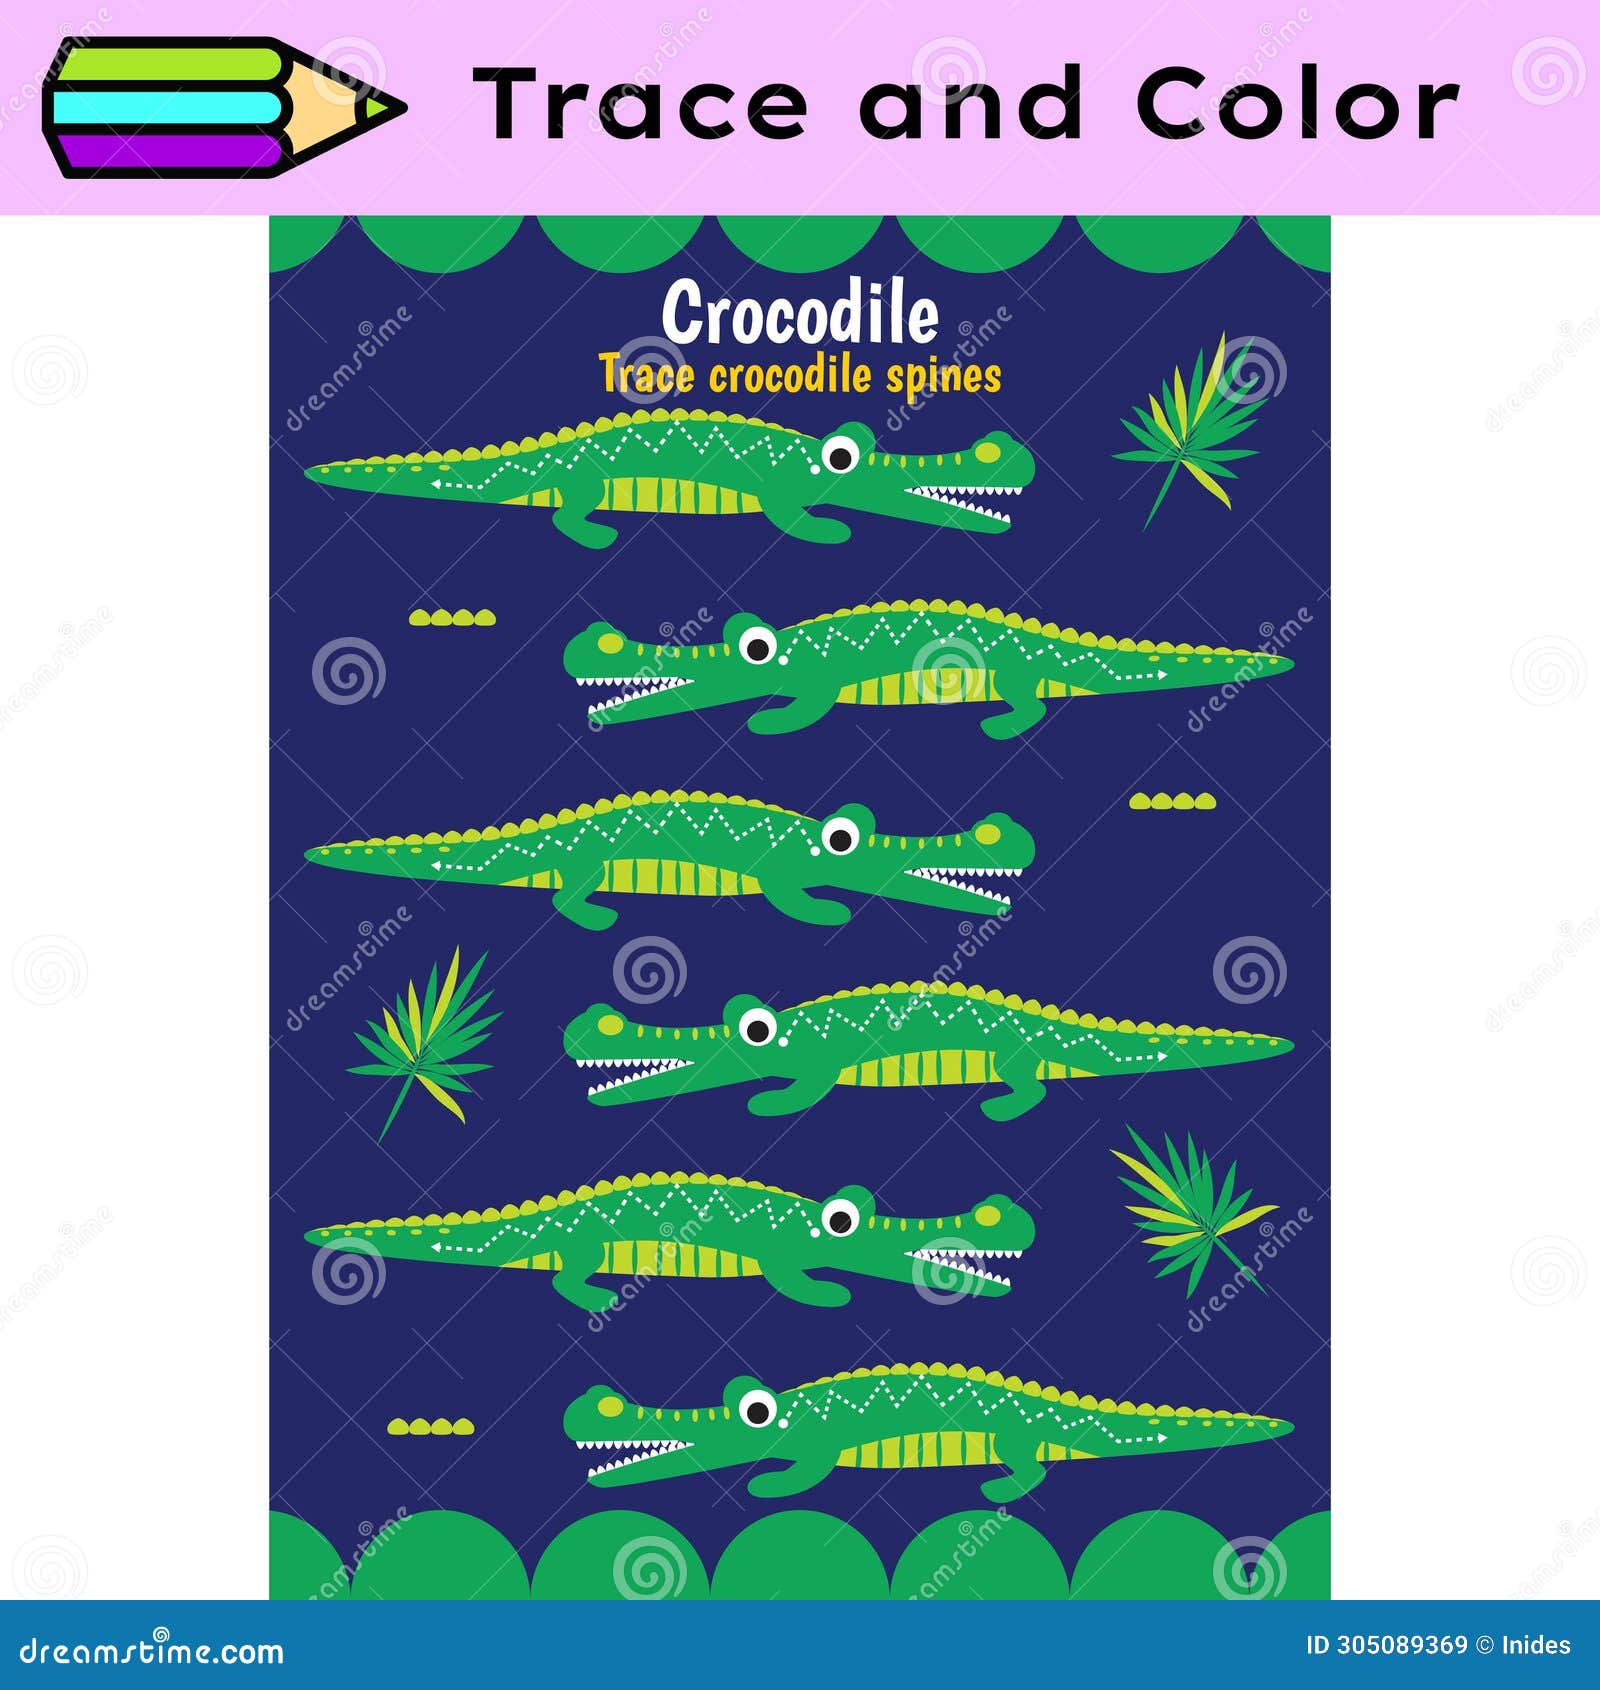 pen tracing lines activity worksheet for children. pencil control for kids practicing motoric skills. crocodiles